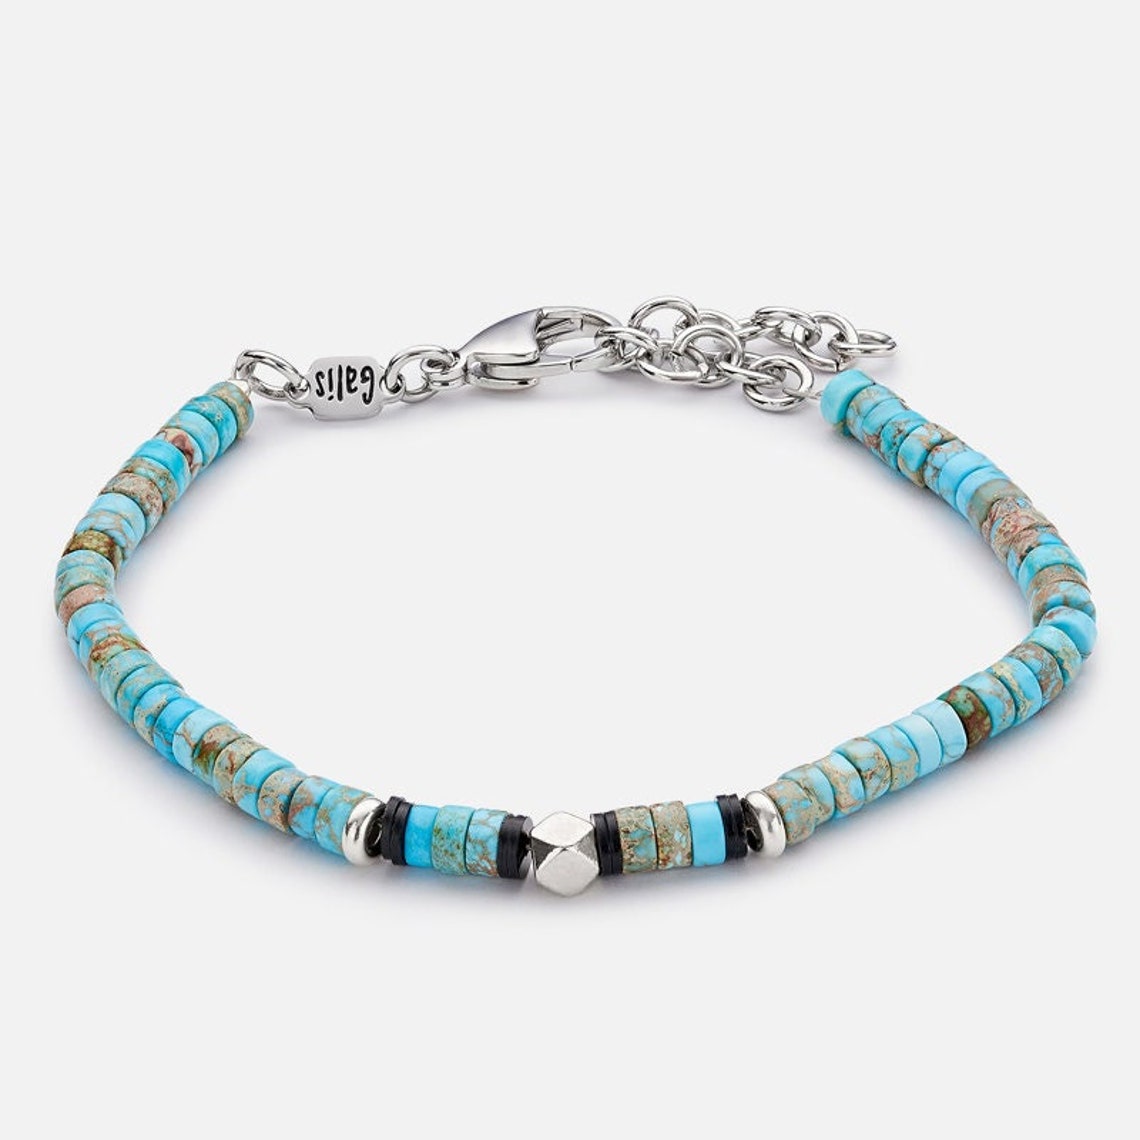 Mens Turquoise Gems and Stainless Steel Bead Bracelet - Etsy